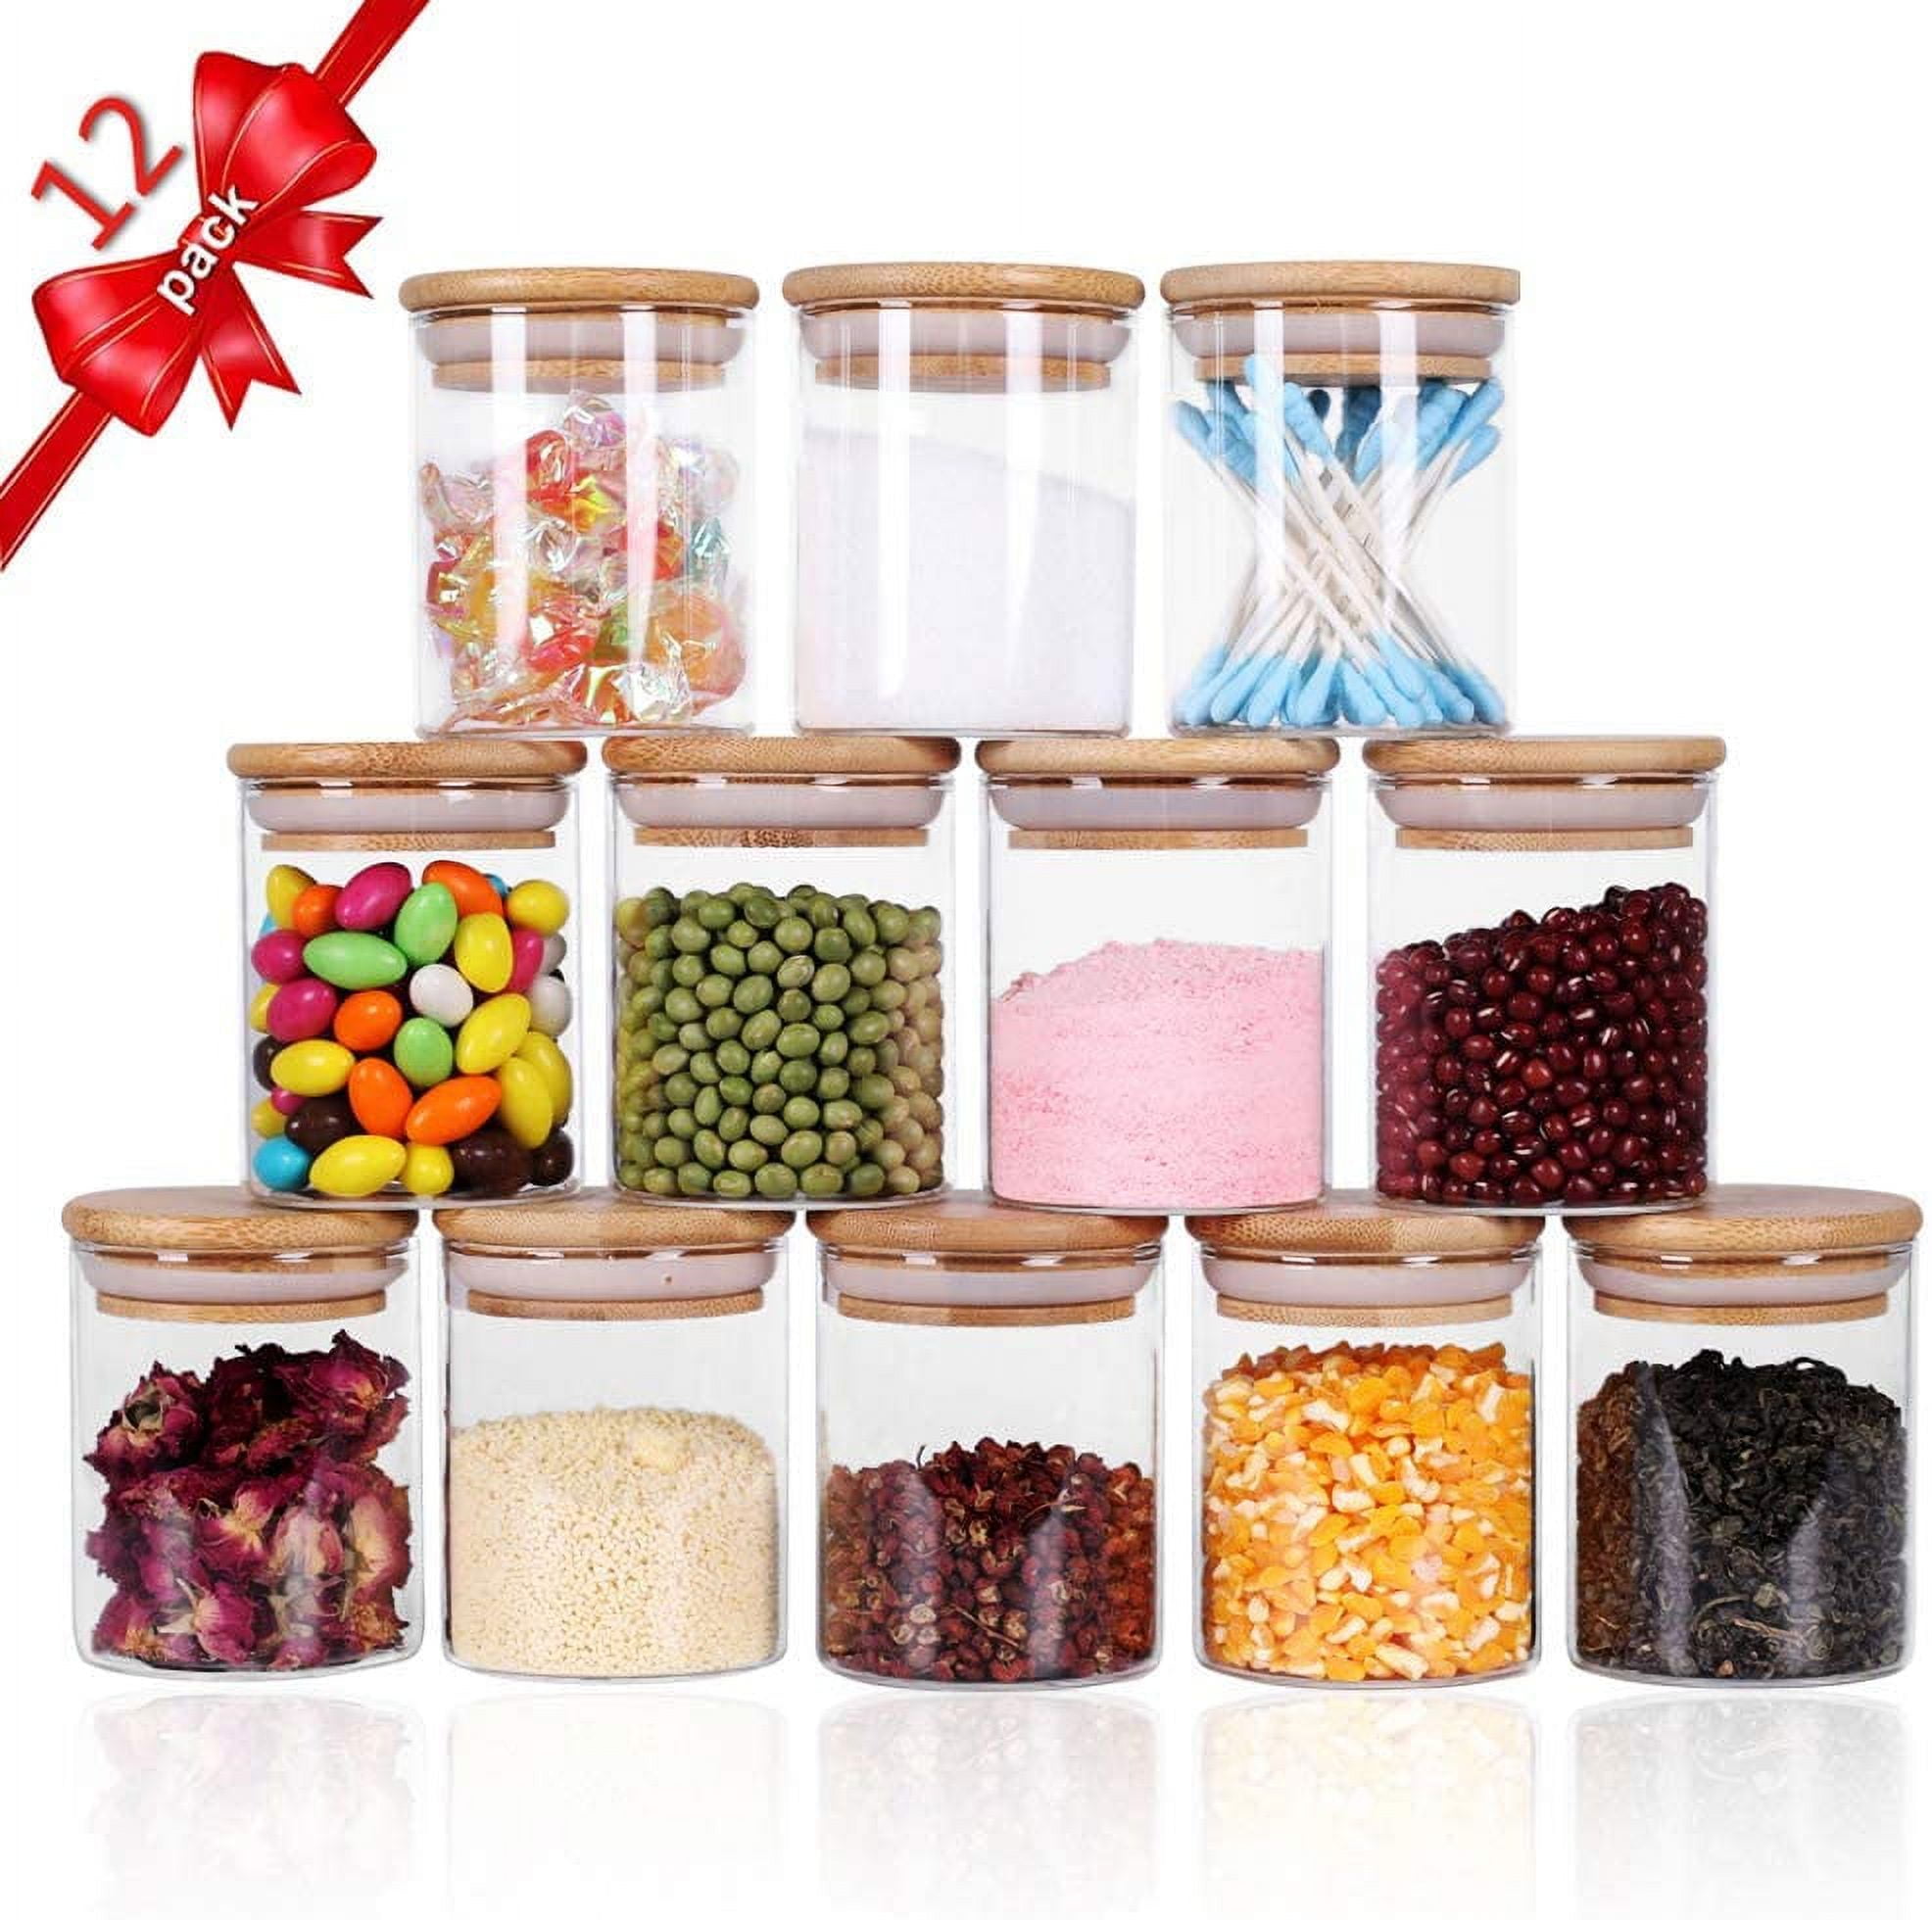 12pcs, Container Sets, Glass Jars With Airtight Lids, Candy Jars With Lids,  Food Storage Containers, Clear Jars, For Tea, Coffee, Spice, Candy, Kitche